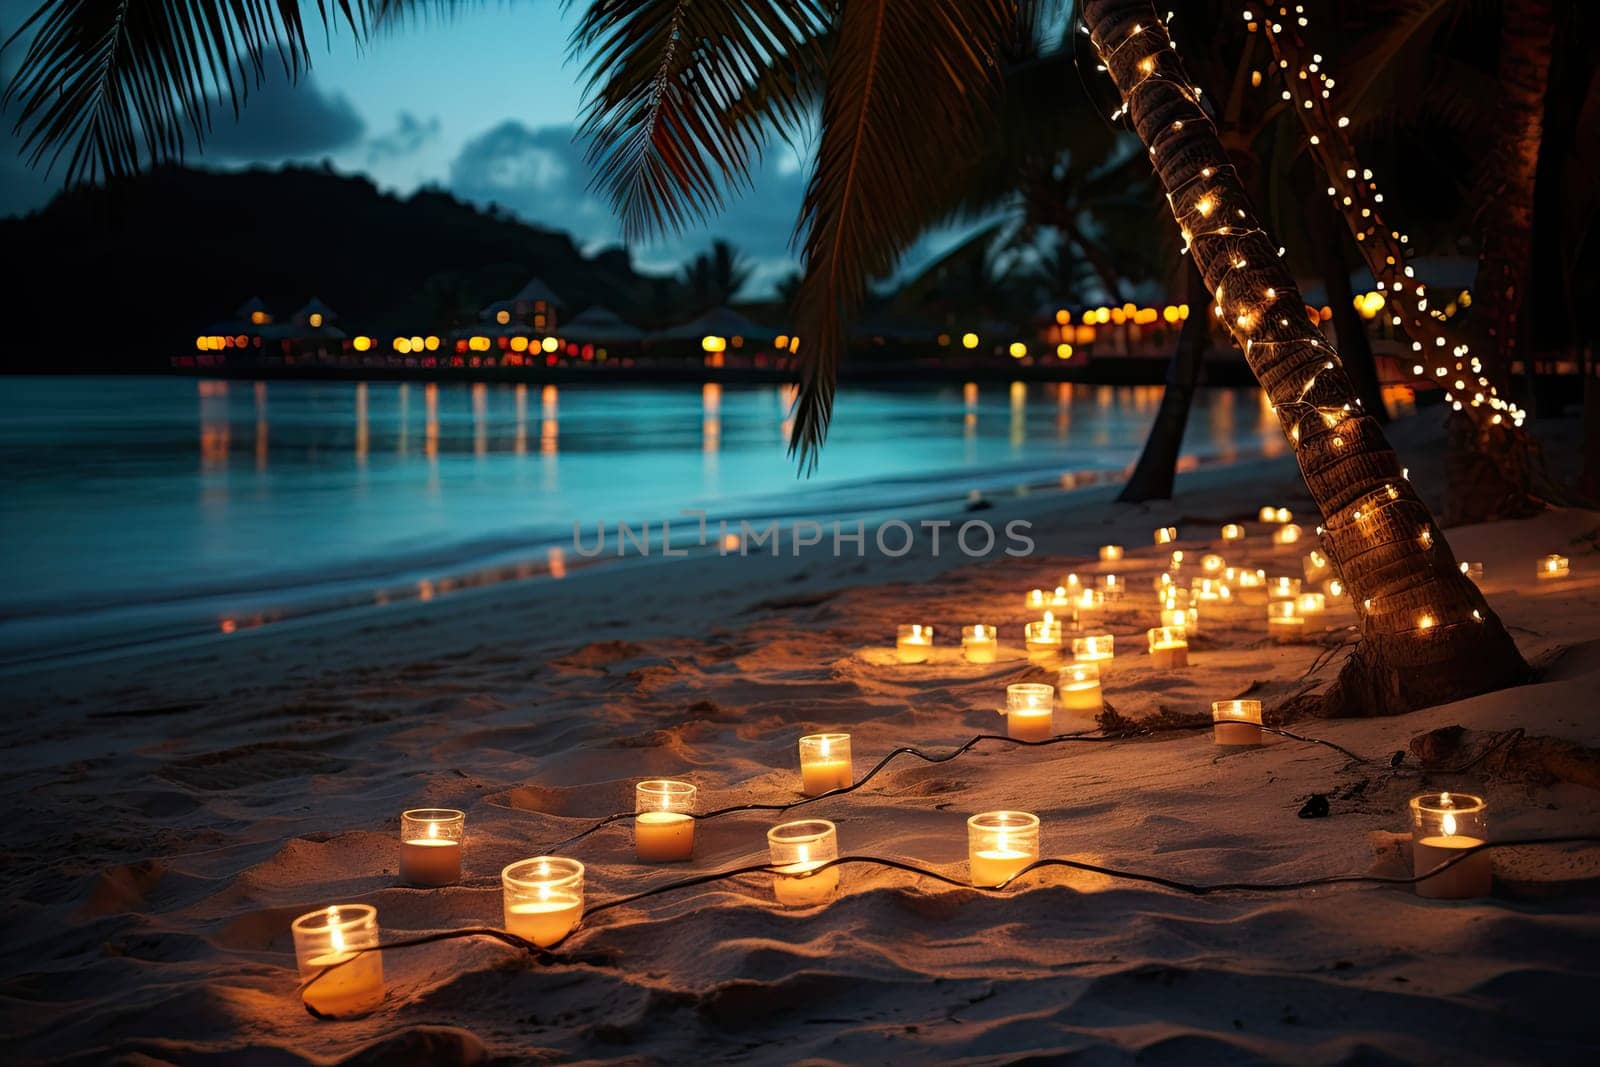 A Dazzling Palm Tree with Festive Christmas Lights, Lighting up a Serene Beach at Night